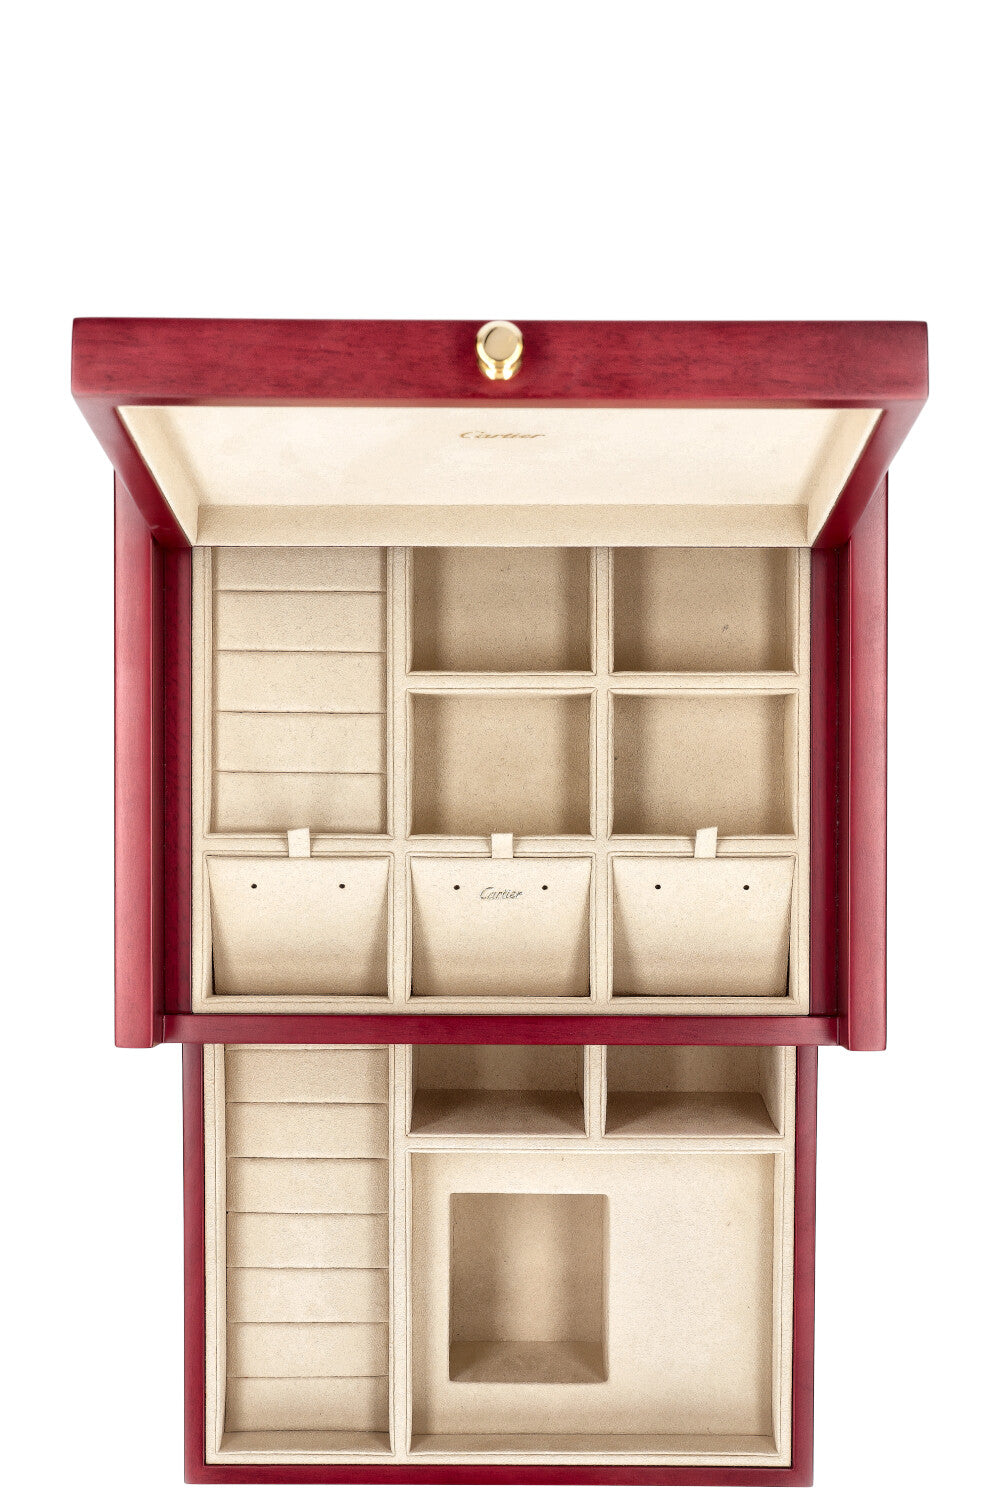 CARTIER Jewelry Box Wood Red